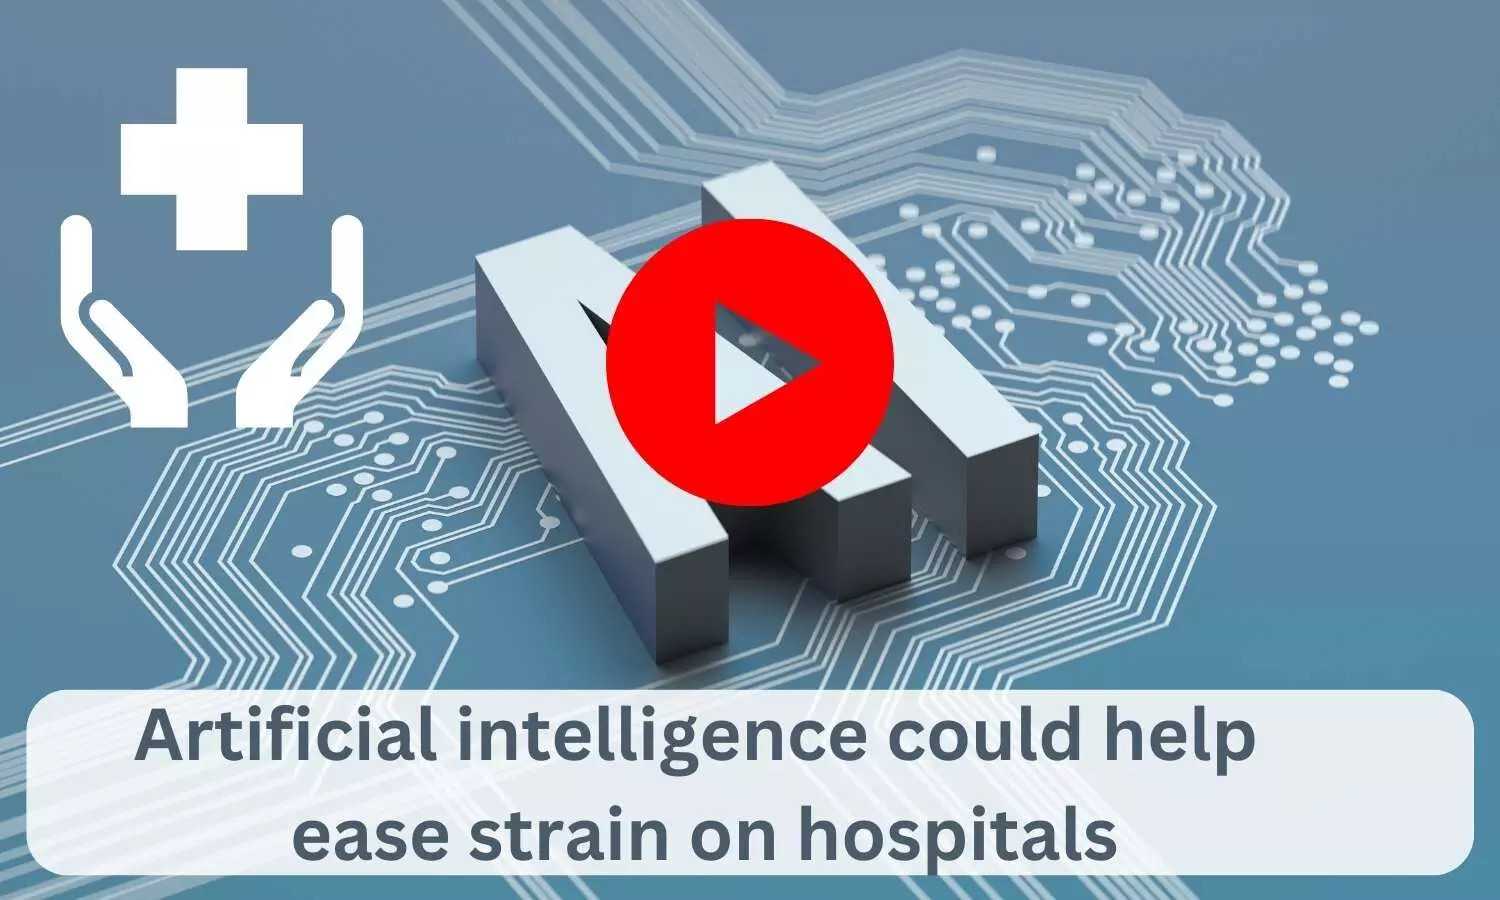 Artificial intelligence could help ease strain on hospitals